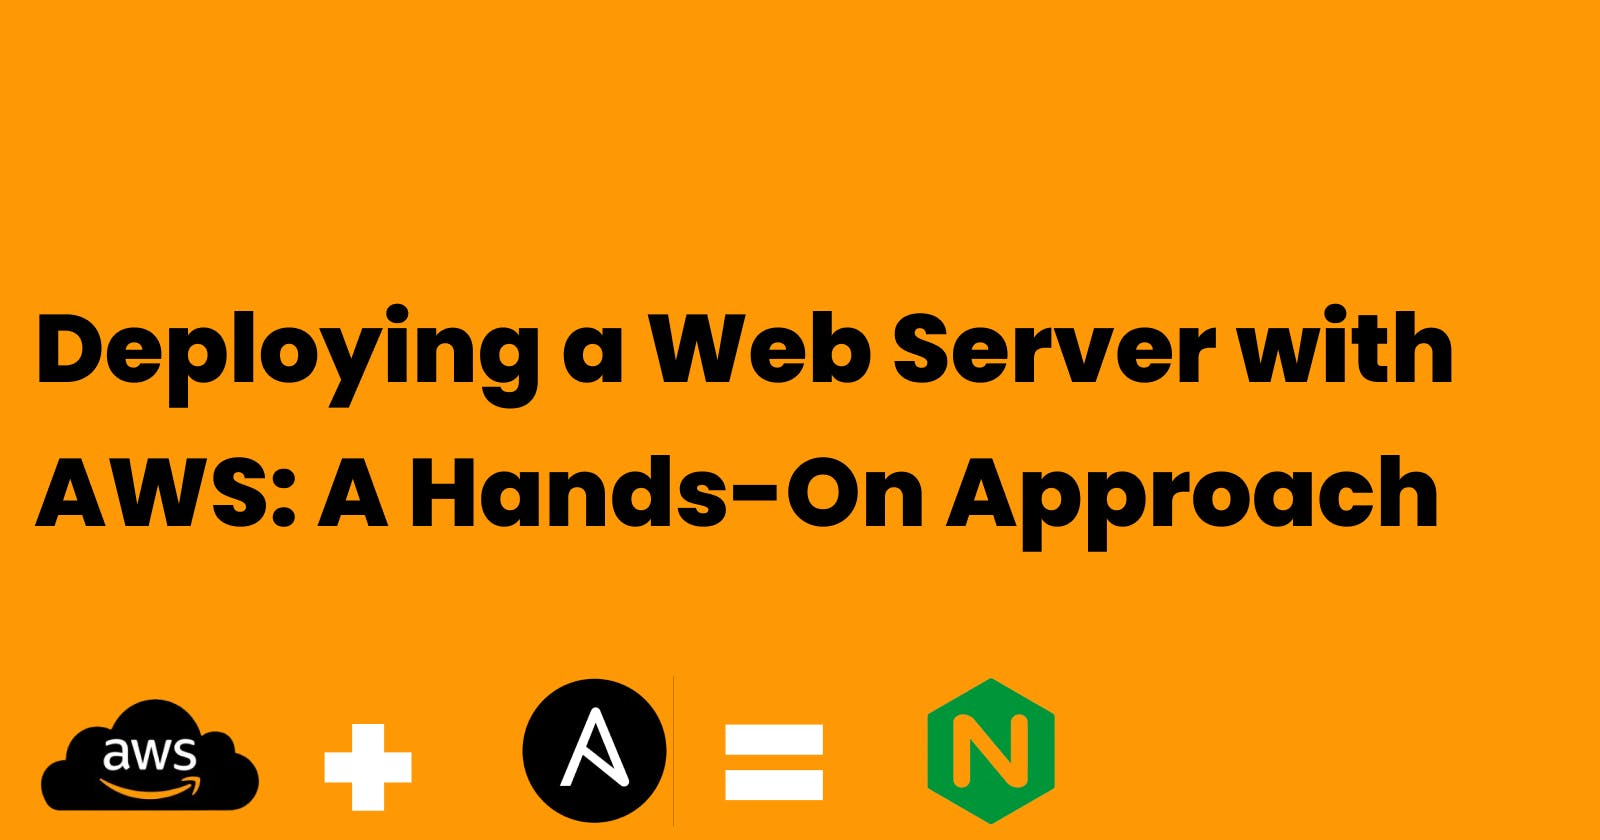 Deploying a Web Server with AWS: A Hands-On Approach